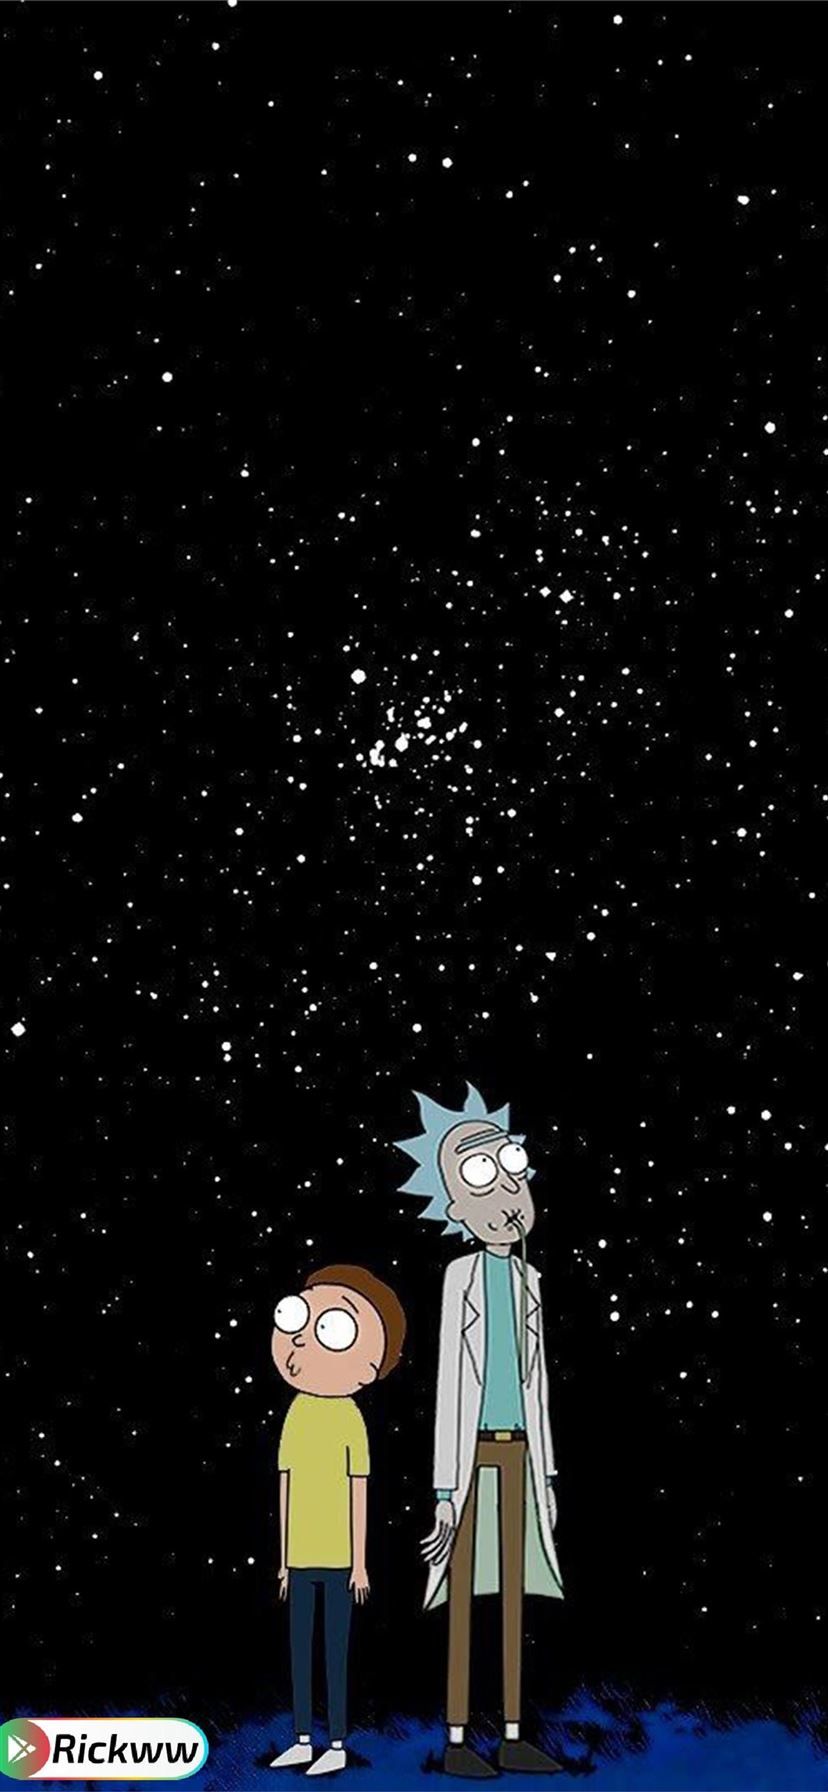 rick and morty iphone #rickandmorty #trends #iPhone11Wallpaper. Cartoon wallpaper, iPhone wallpaper, Money wallpaper iphone